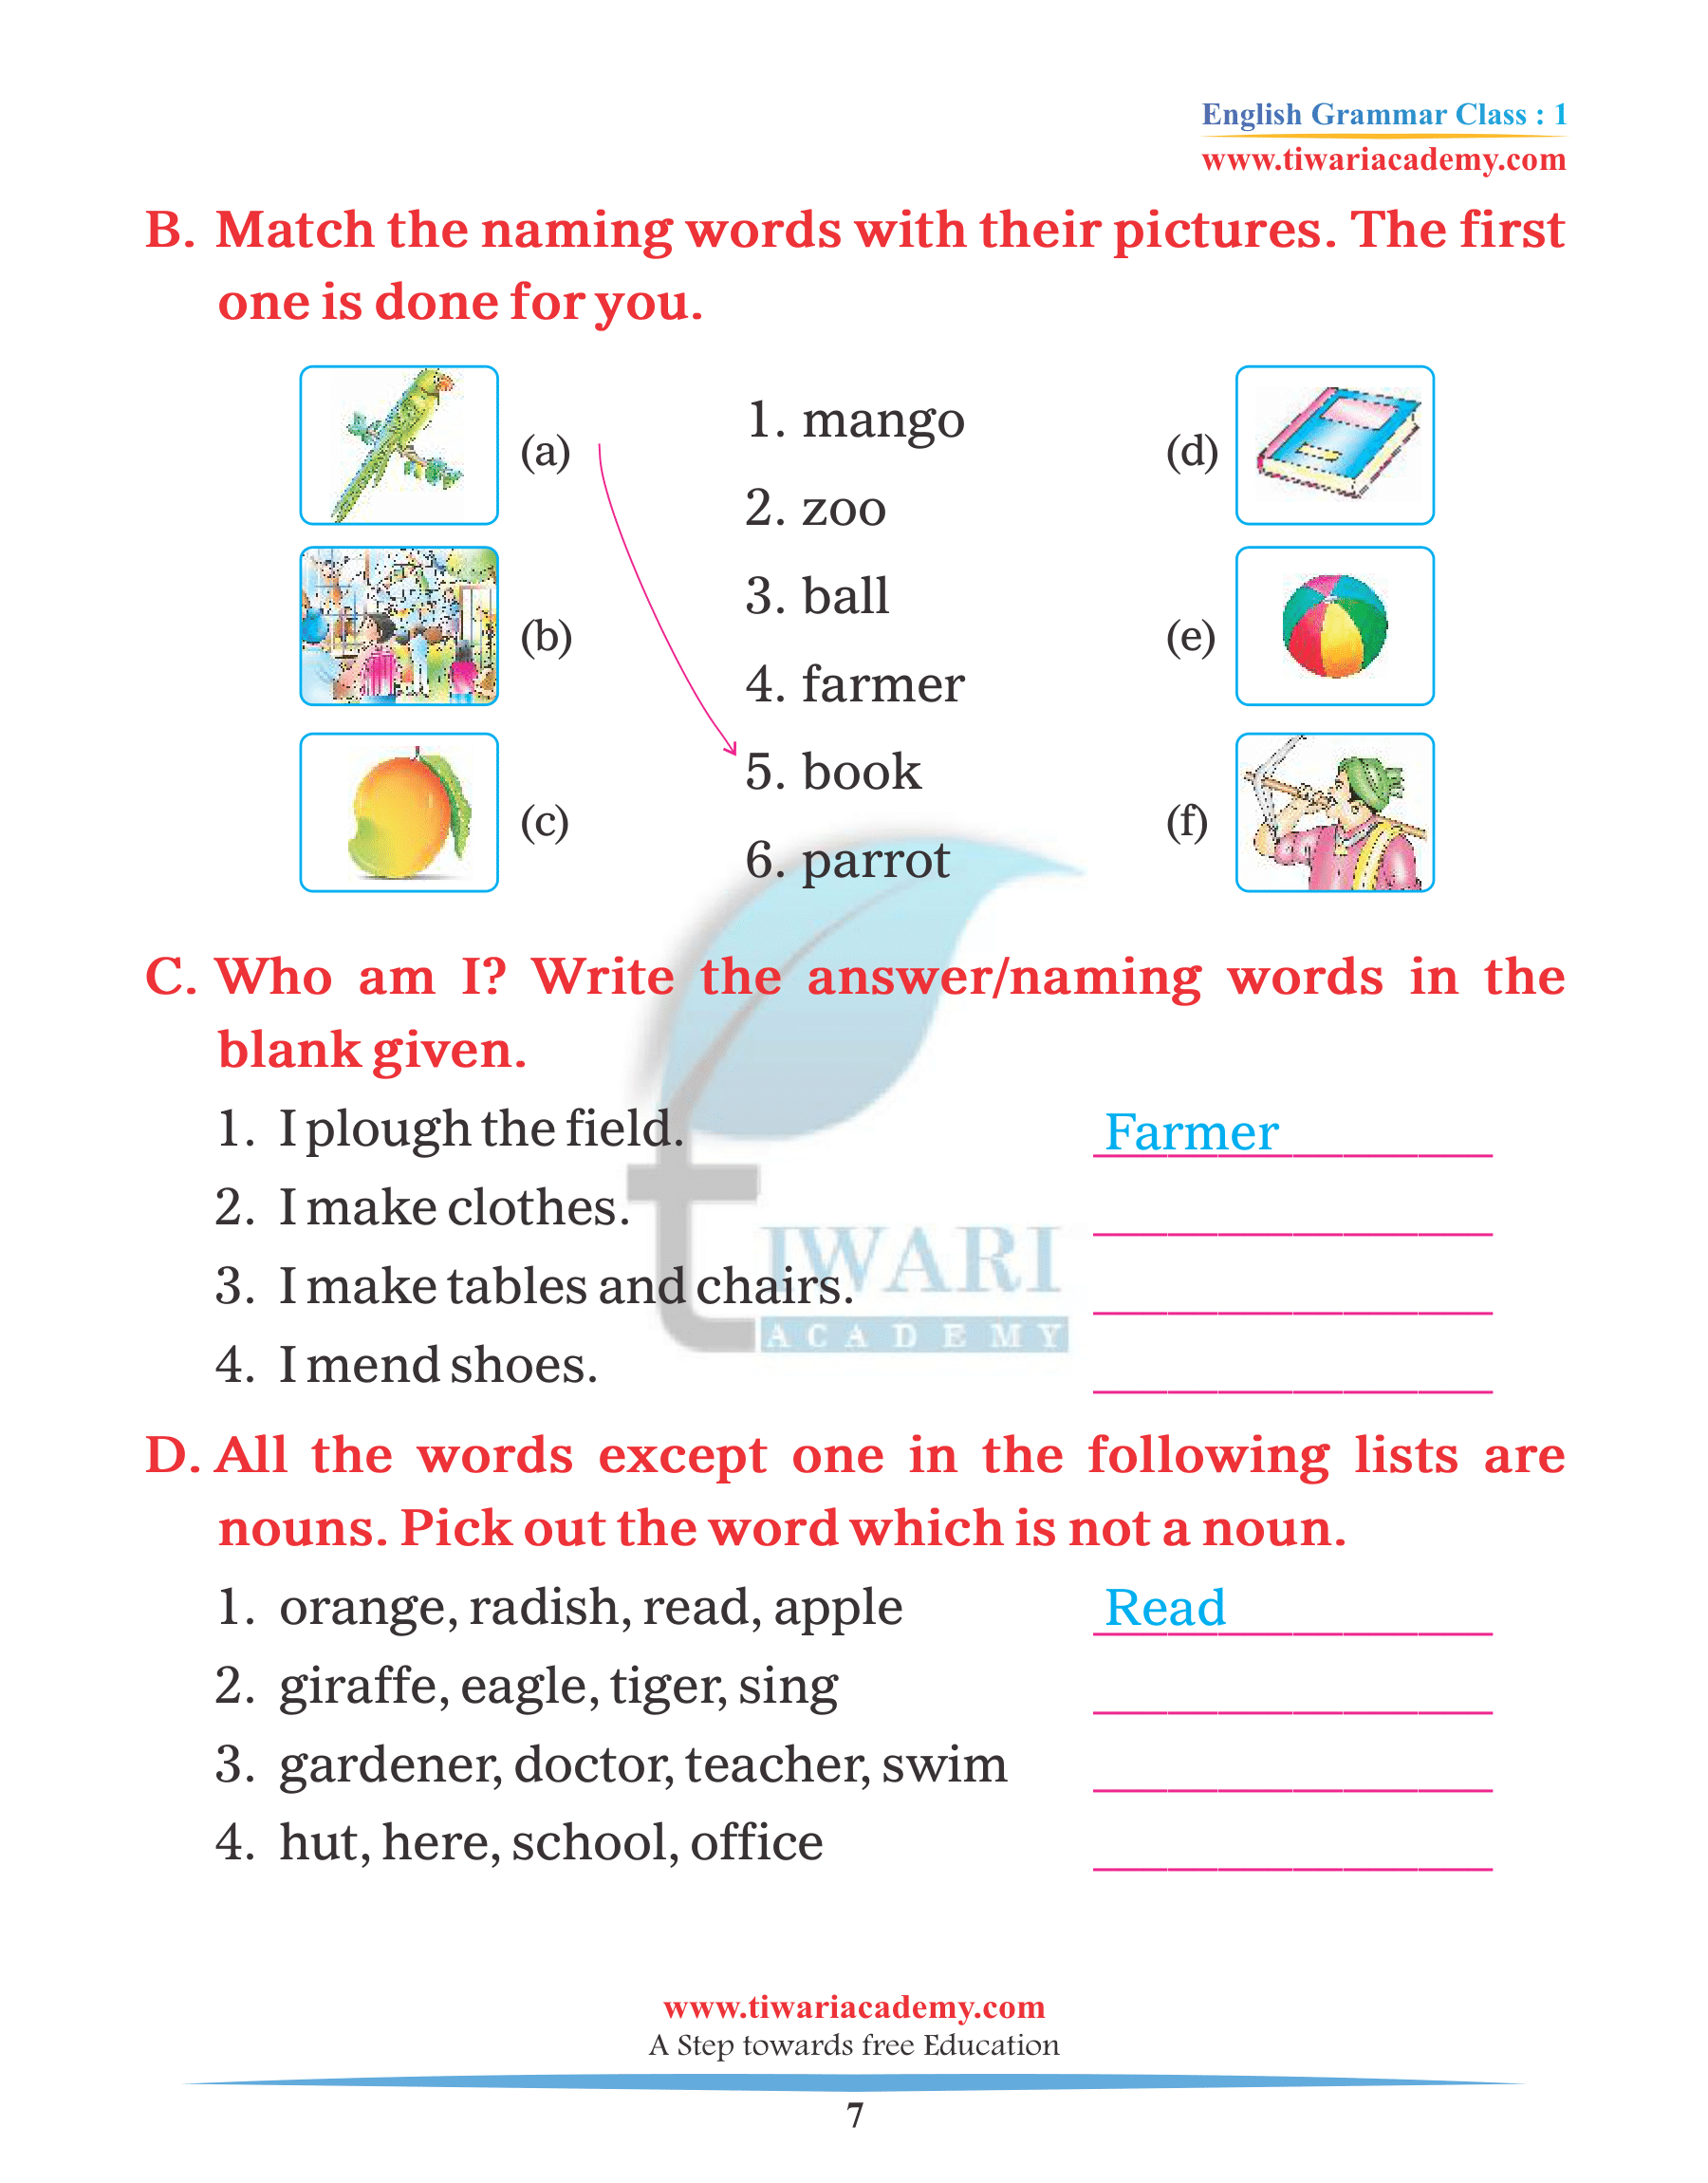 Assignment of Naming Words or Noun